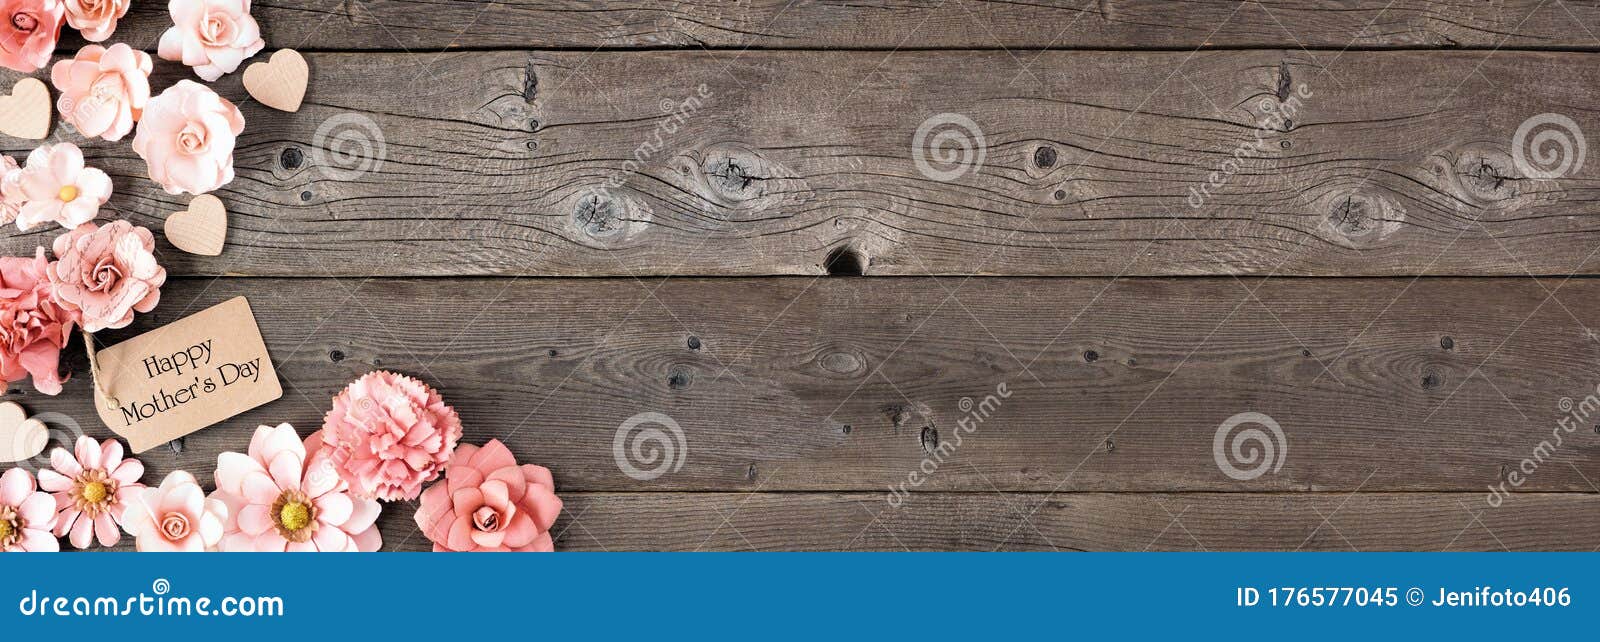 happy mothers day corner border with paper flowers and gift tag against a rustic wood banner background